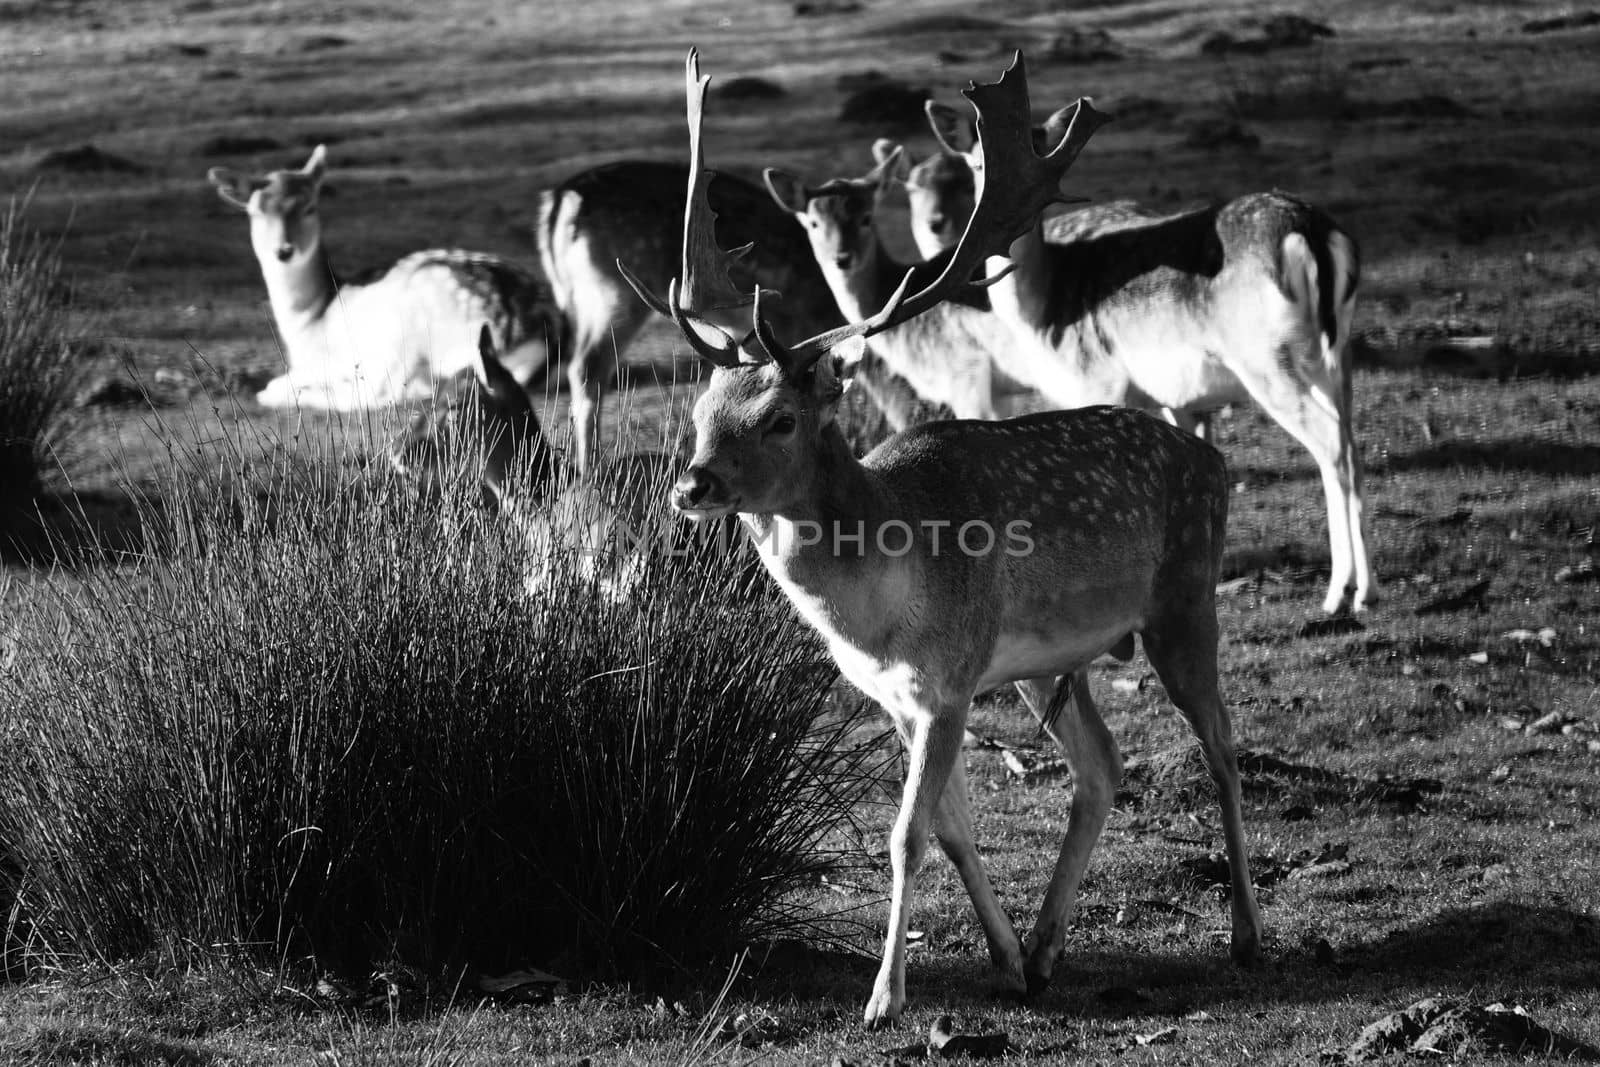 A herd of fallow deer in black and white. The buck with beautiful antlers walks from the group